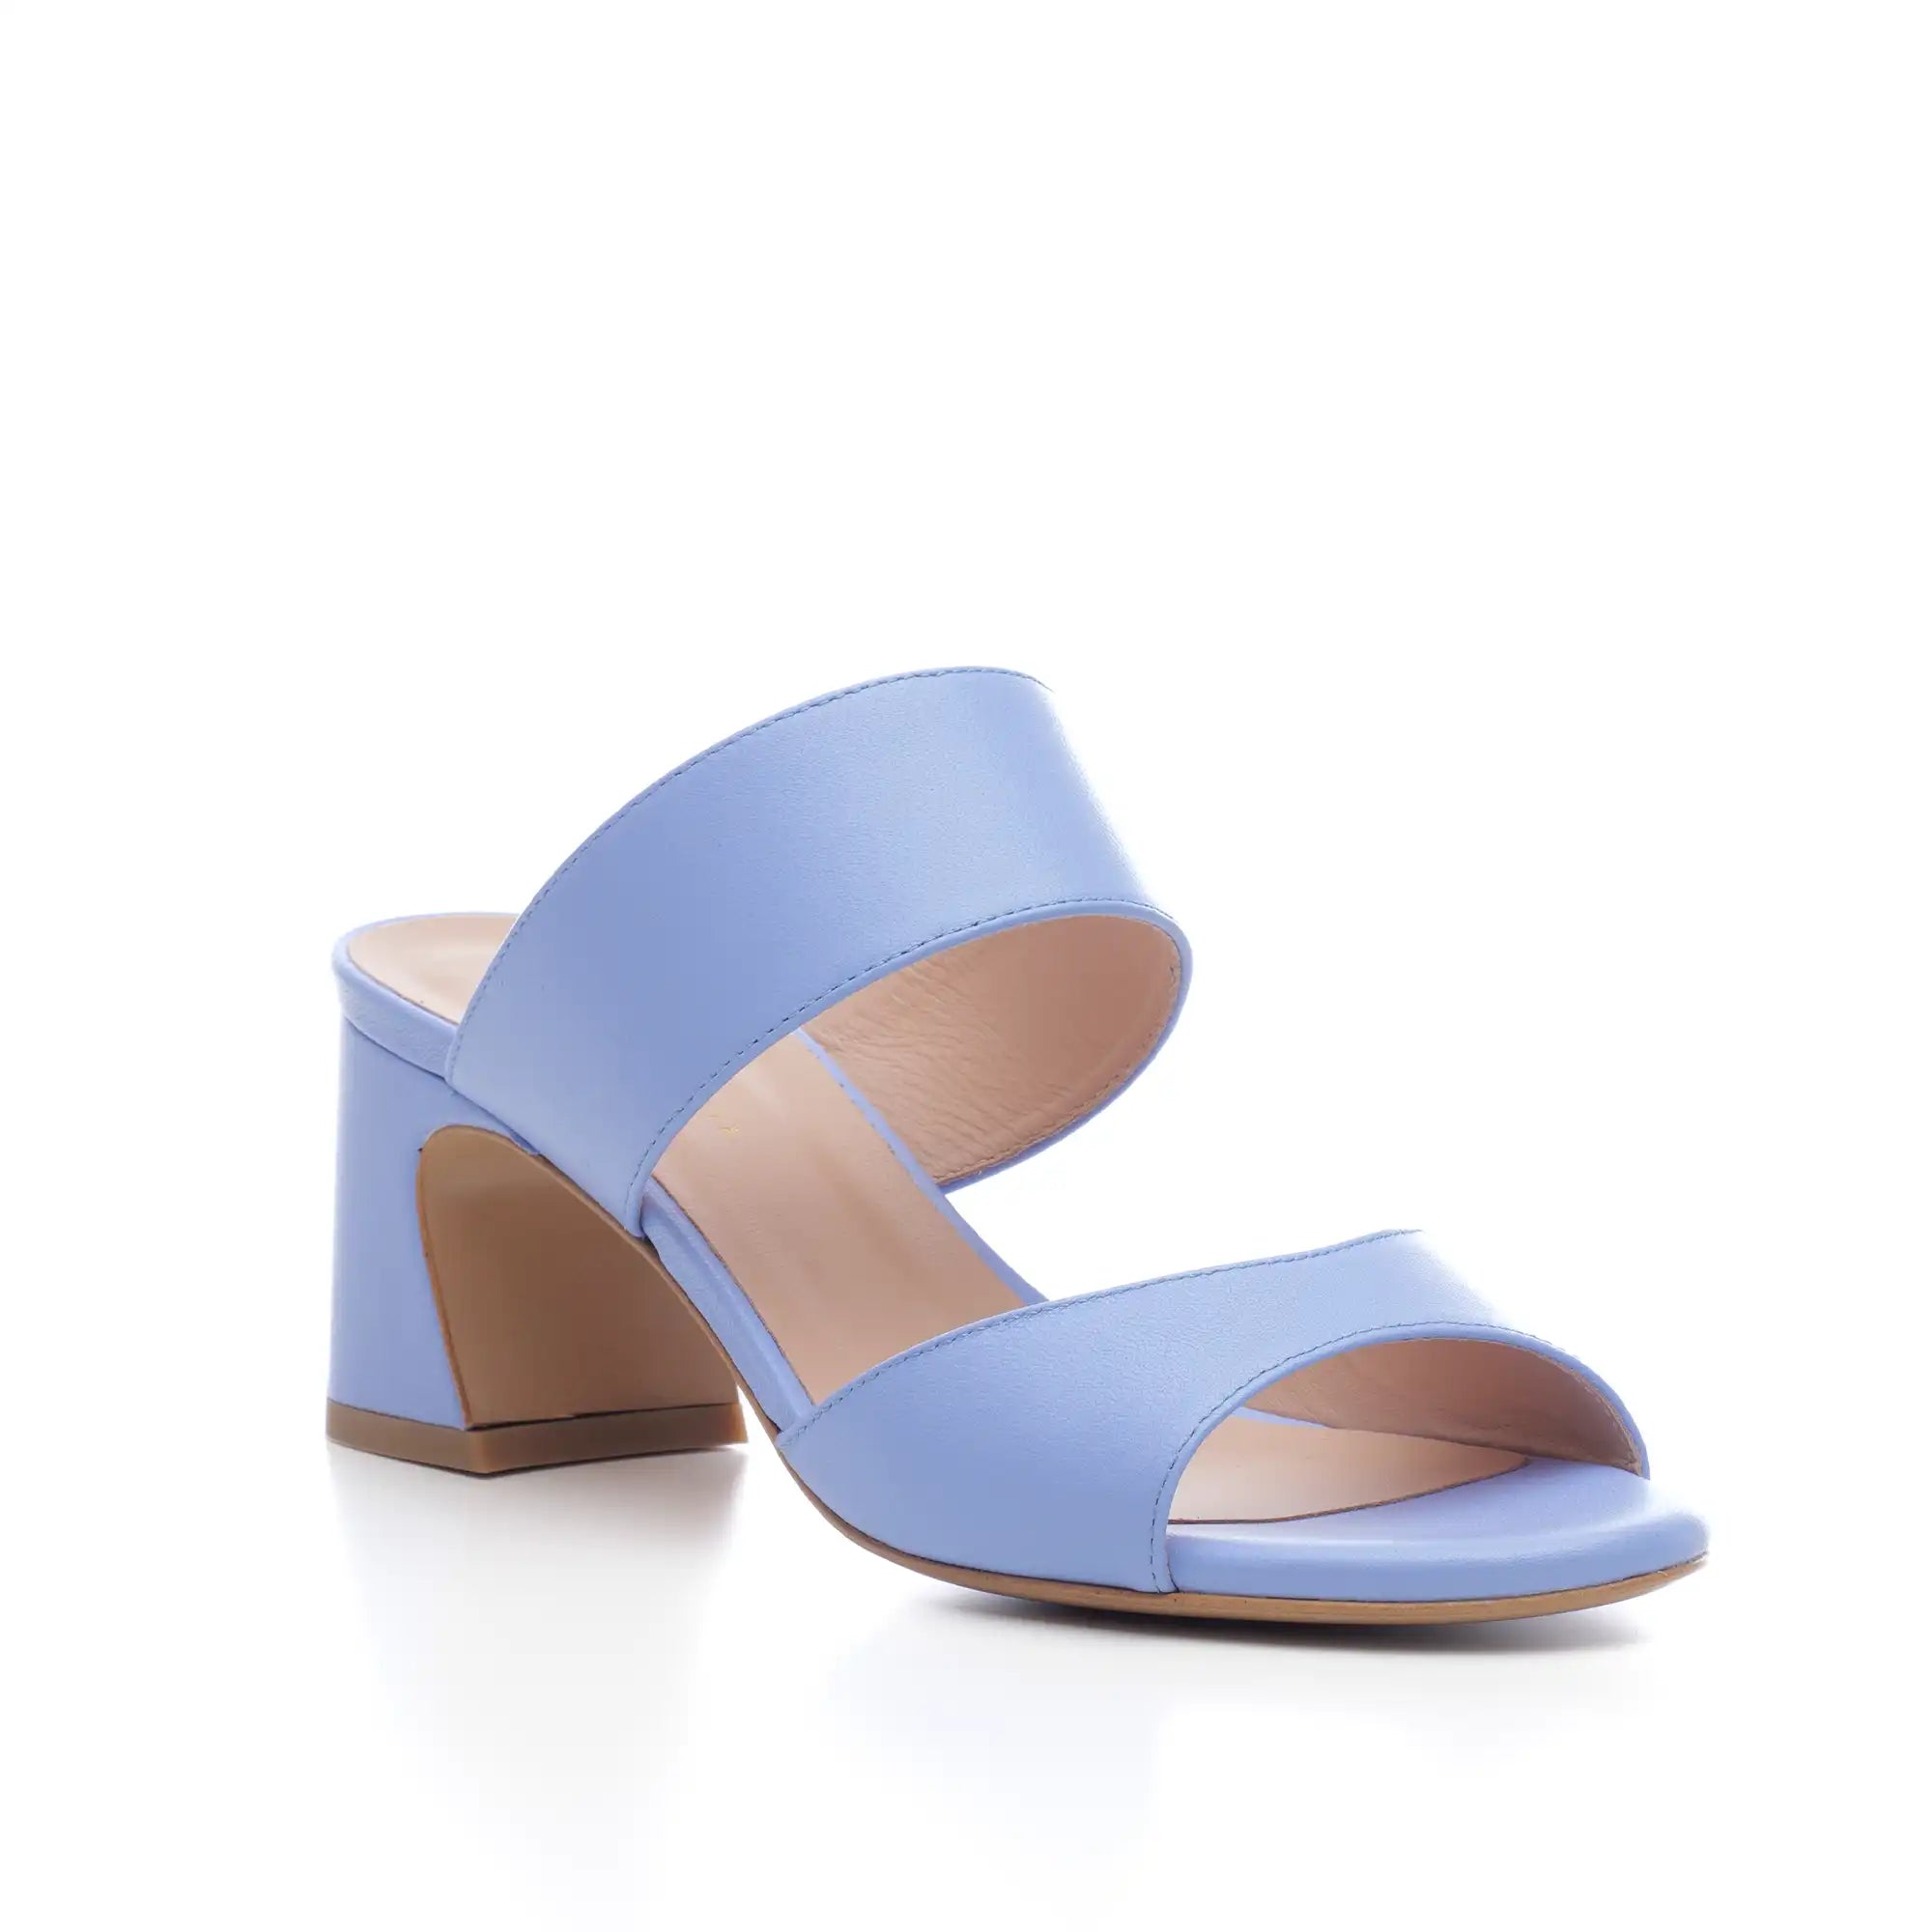 Elle mules sandal with low wide heel and instep band in powder blue leather